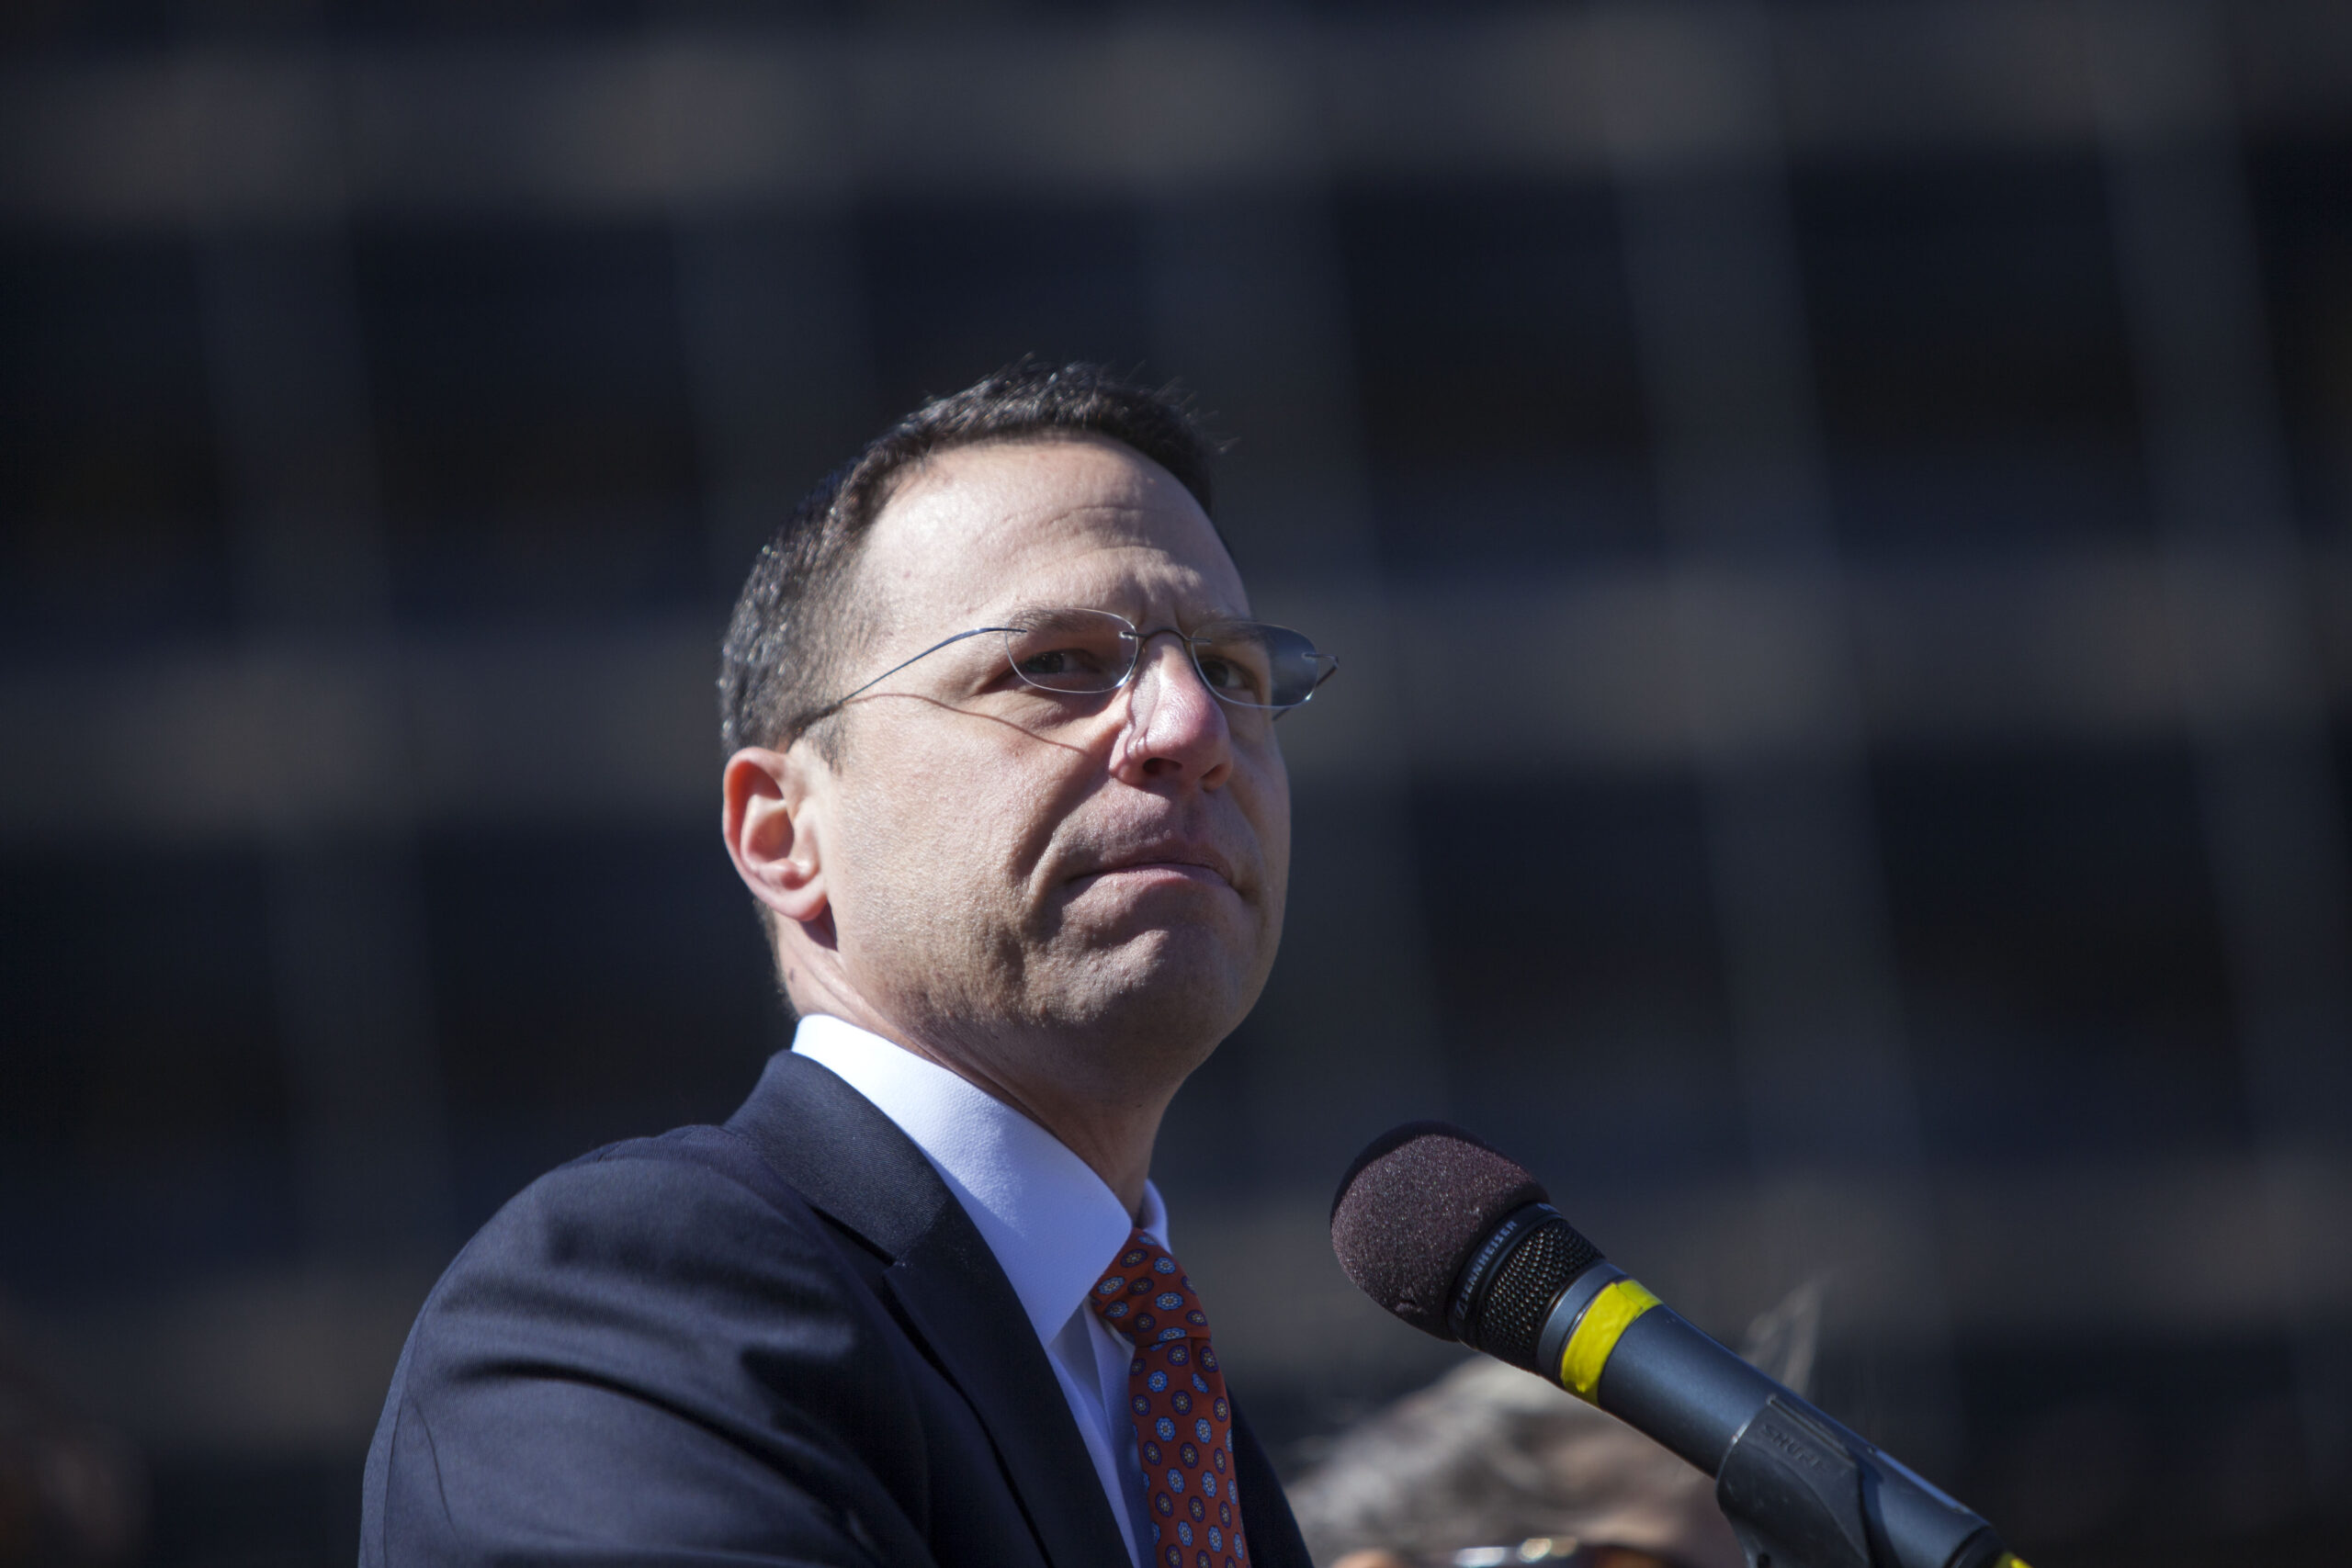 Gov. Josh Shapiro drew the ire of many environmentalists when he appointed a 17-member working group on climate emissions reductions without revealing all of the names of panel members. Credit: Jessica Kourkounis/Getty Images.